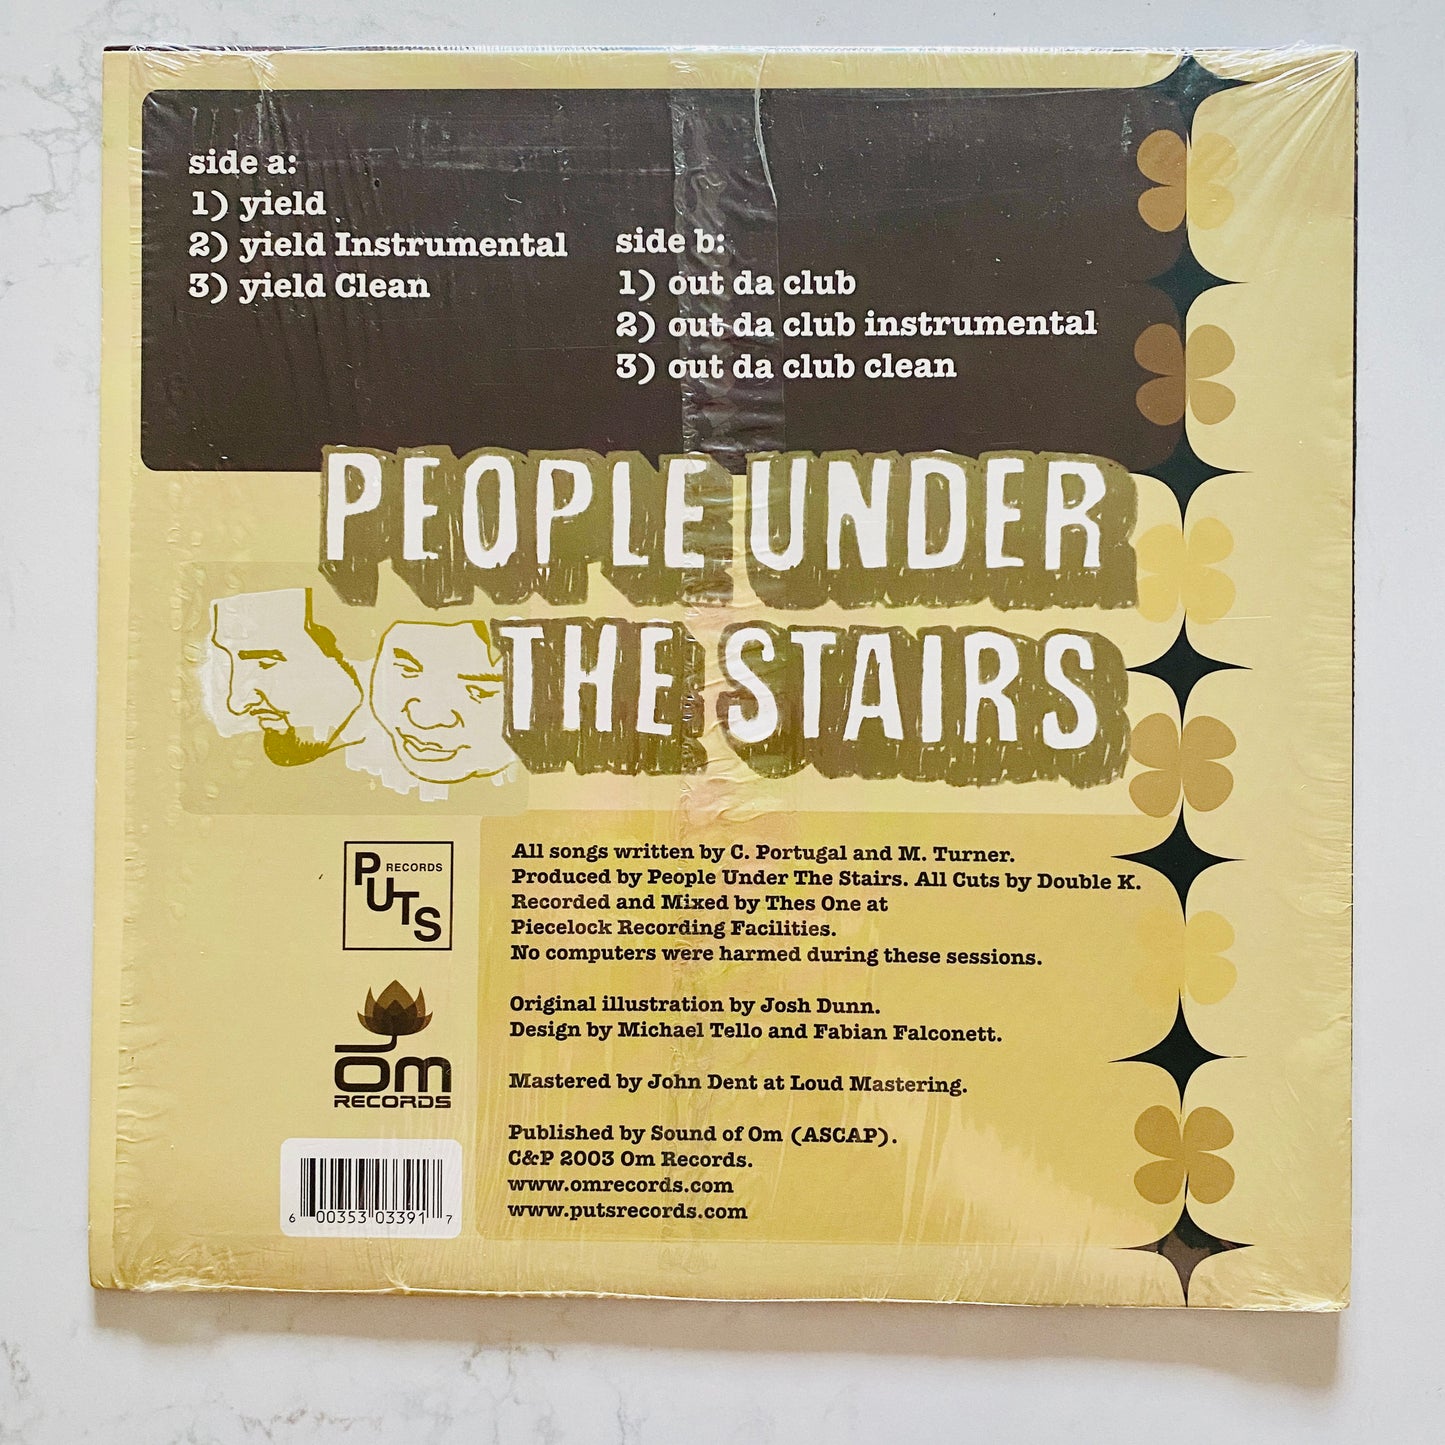 People Under The Stairs - Yield / Out Da Club (12"). 12" HIP-HOP